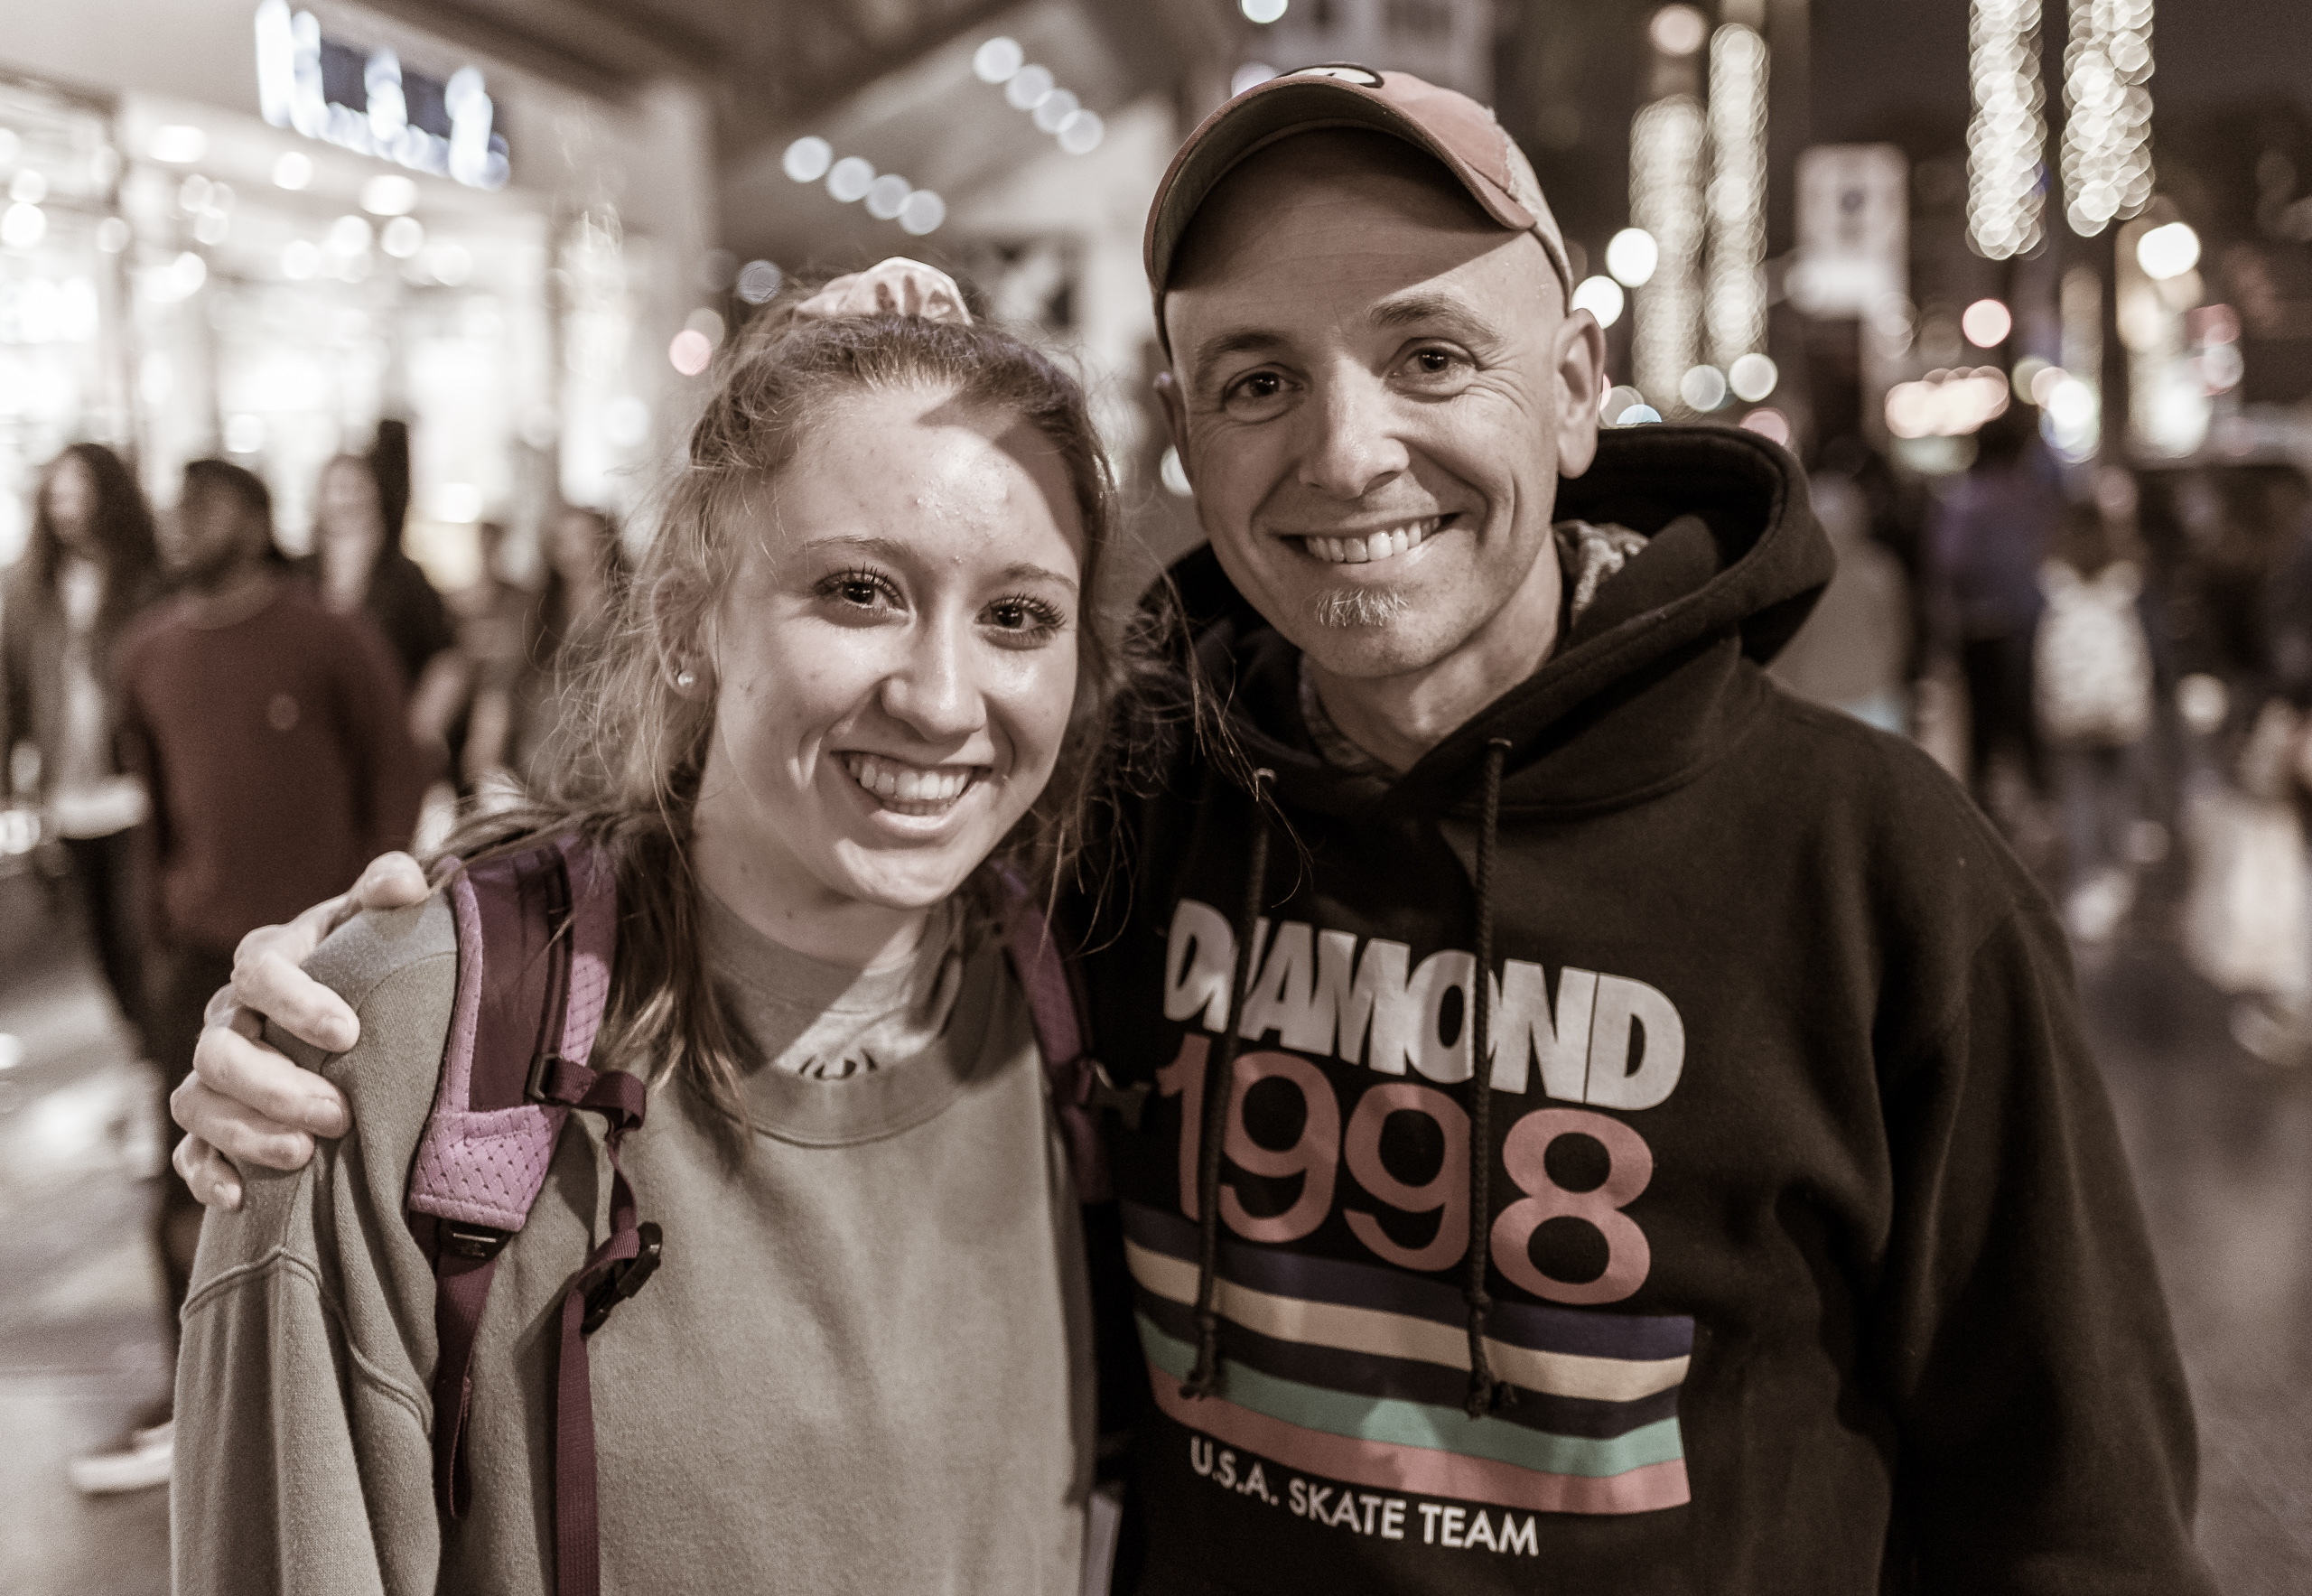 Olivia & Rich: a high school student of about 16 or 17 and one of her group leaders in his 20s or 30s. They're on a trip from a 200 student Christian High School in Lubbock, Texas. Their group of 31 has been speaking to the people on Hollywood Blvd, and here they take some time out to talk with me